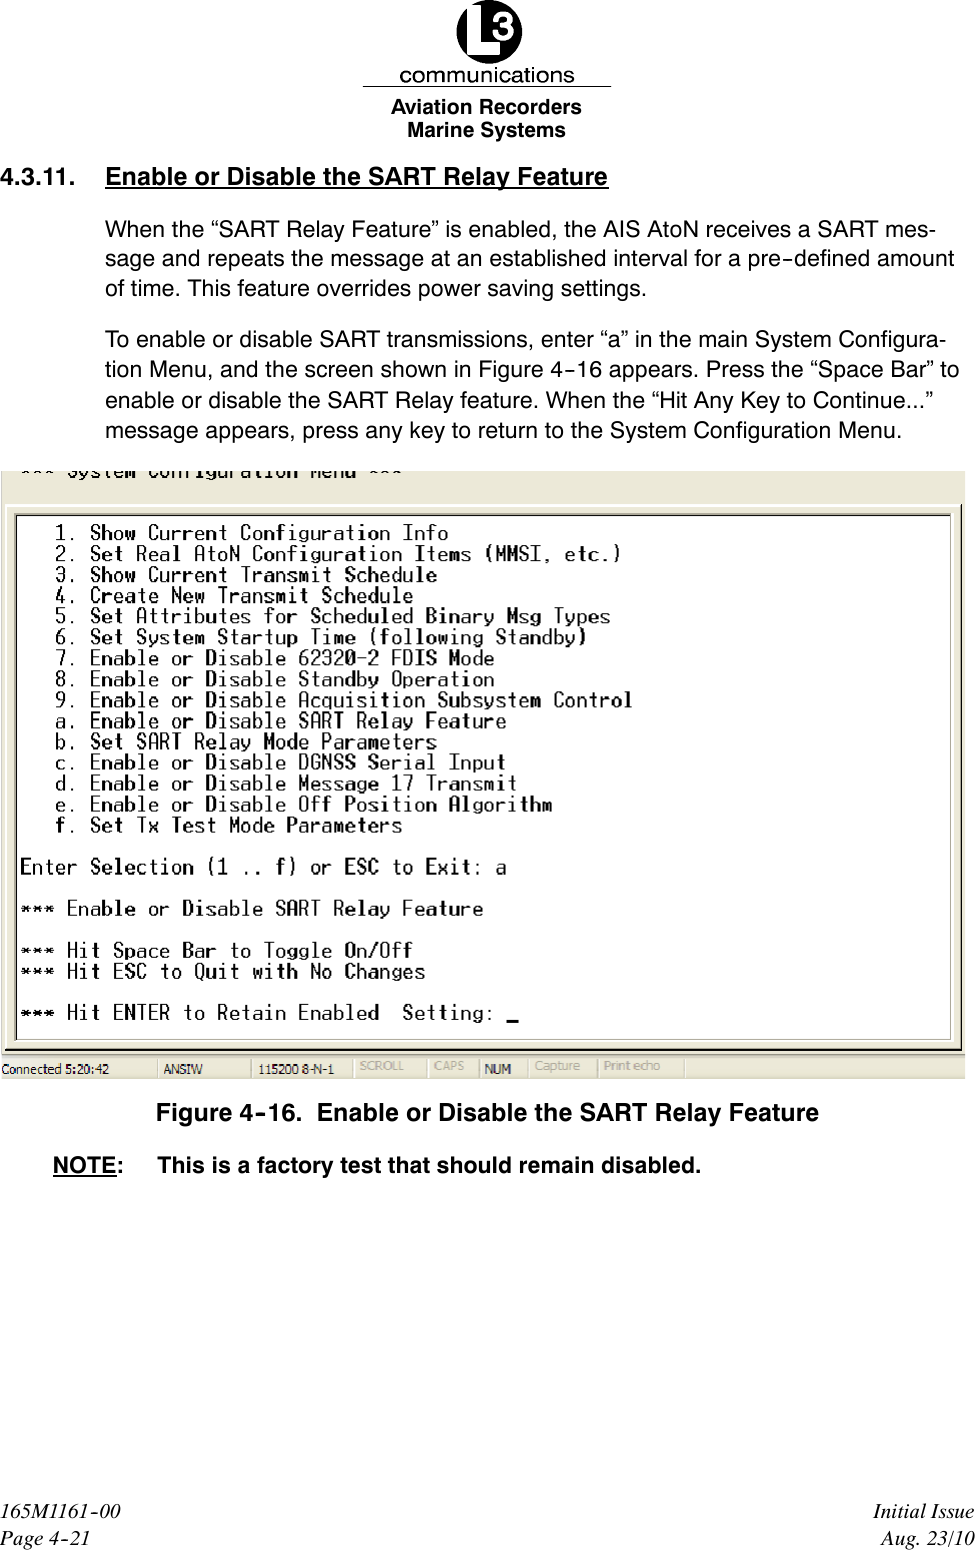 Marine SystemsAviation RecordersPage 4--21Initial Issue165M1161--00Aug. 23/104.3.11. Enable or Disable the SART Relay FeatureWhen the “SART Relay Feature” is enabled, the AIS AtoN receives a SART mes-sage and repeats the message at an established interval for a pre--defined amountof time. This feature overrides power saving settings.To enable or disable SART transmissions, enter “a” in the main System Configura-tion Menu, and the screen shown in Figure 4--16 appears. Press the “Space Bar” toenable or disable the SART Relay feature. When the “Hit Any Key to Continue...”message appears, press any key to return to the System Configuration Menu.Figure 4--16. Enable or Disable the SART Relay FeatureNOTE: This is a factory test that should remain disabled.